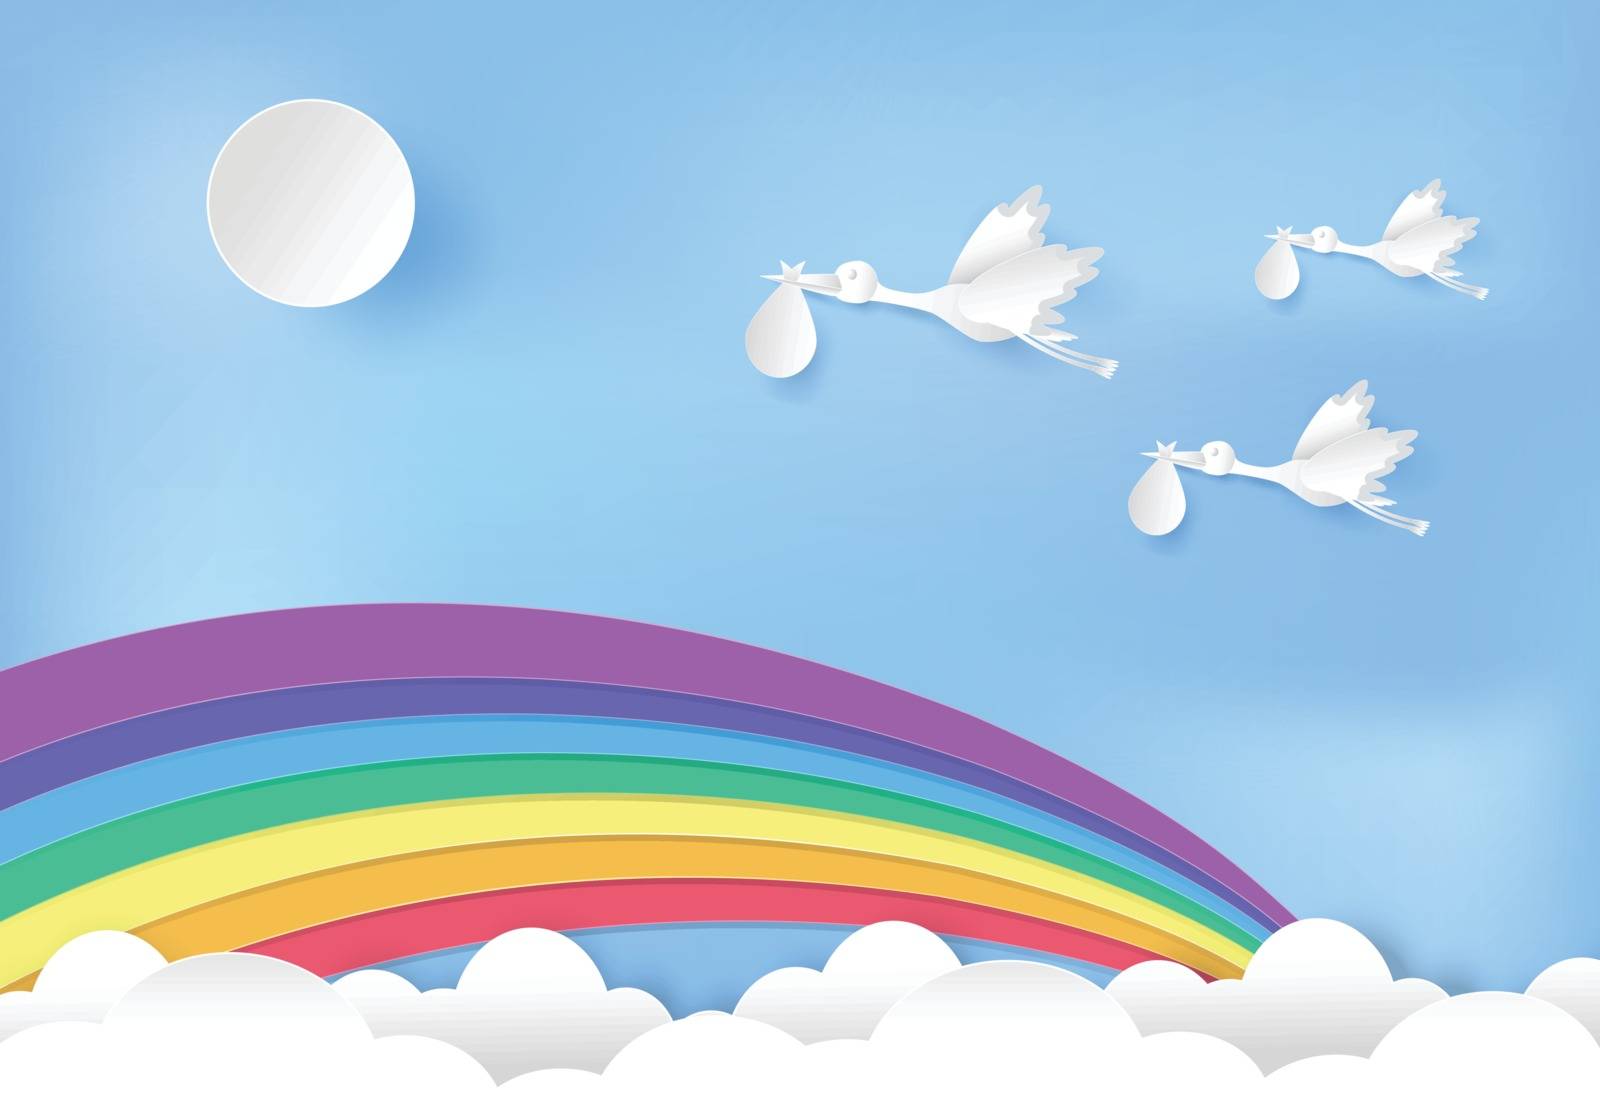 Paper art of stork flying with baby and rainbow on blue sky pape by Kheat